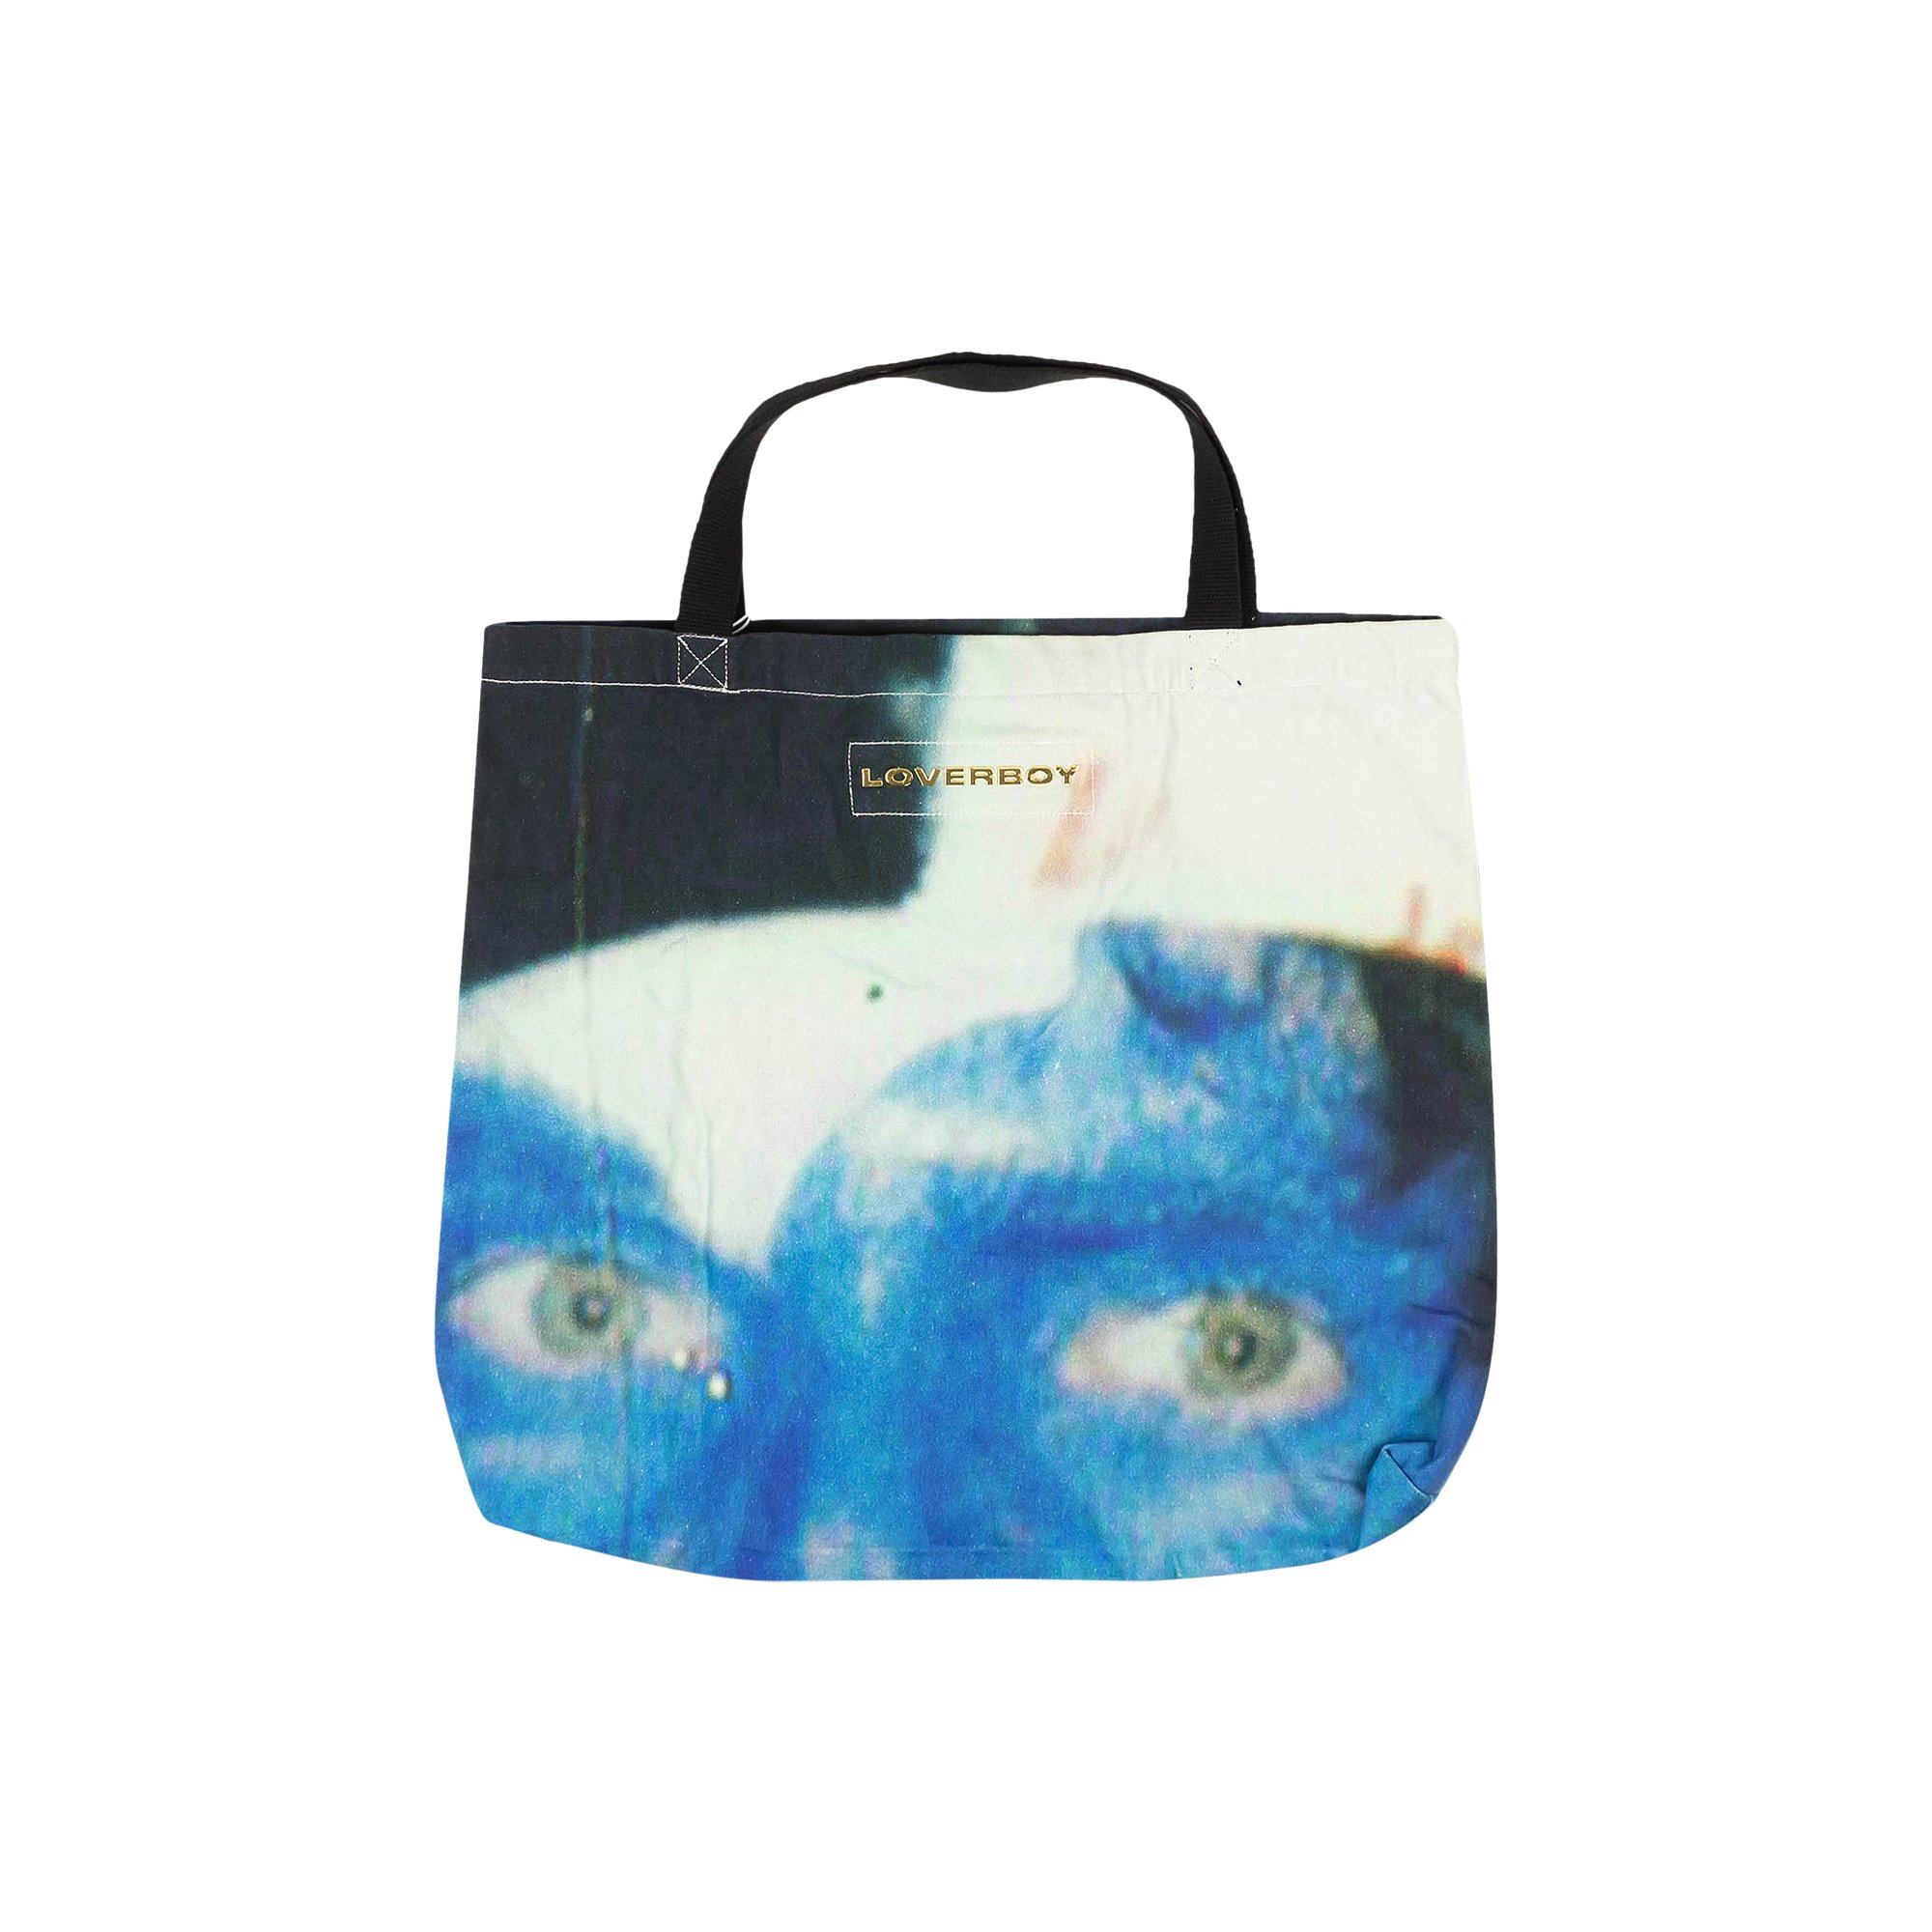 Buy Charles Jeffrey Loverboy Large Graphic Tote Bag 'Multicolor